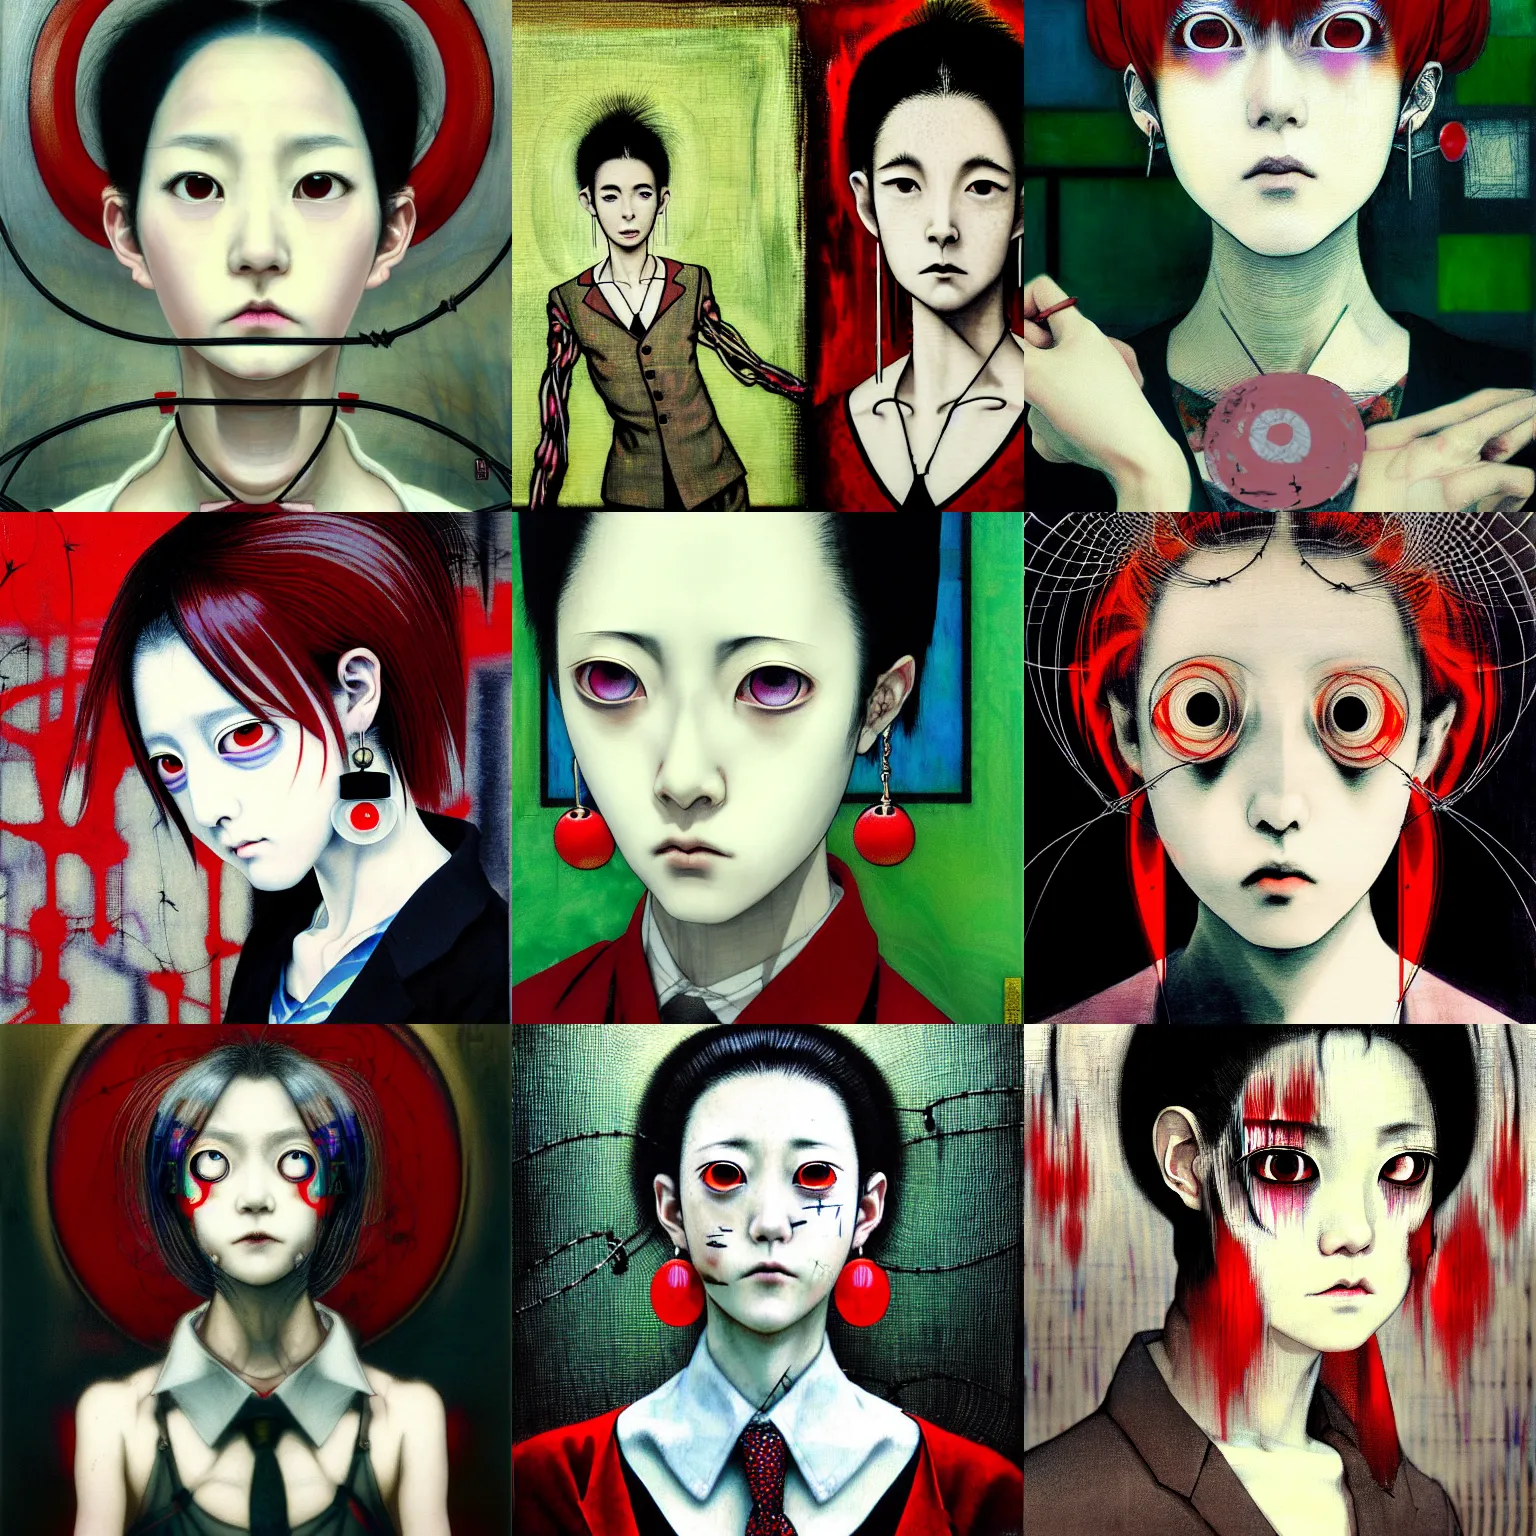 Prompt: yoshitaka amano blurred and dreamy realistic three quarter angle portrait of a sinister young woman with short hair, big earrings, barbed wire and red eyes wearing office suit with tie, junji ito abstract patterns in the background, satoshi kon anime, noisy film grain effect, highly detailed, renaissance oil painting, weird portrait angle, blurred lost edges